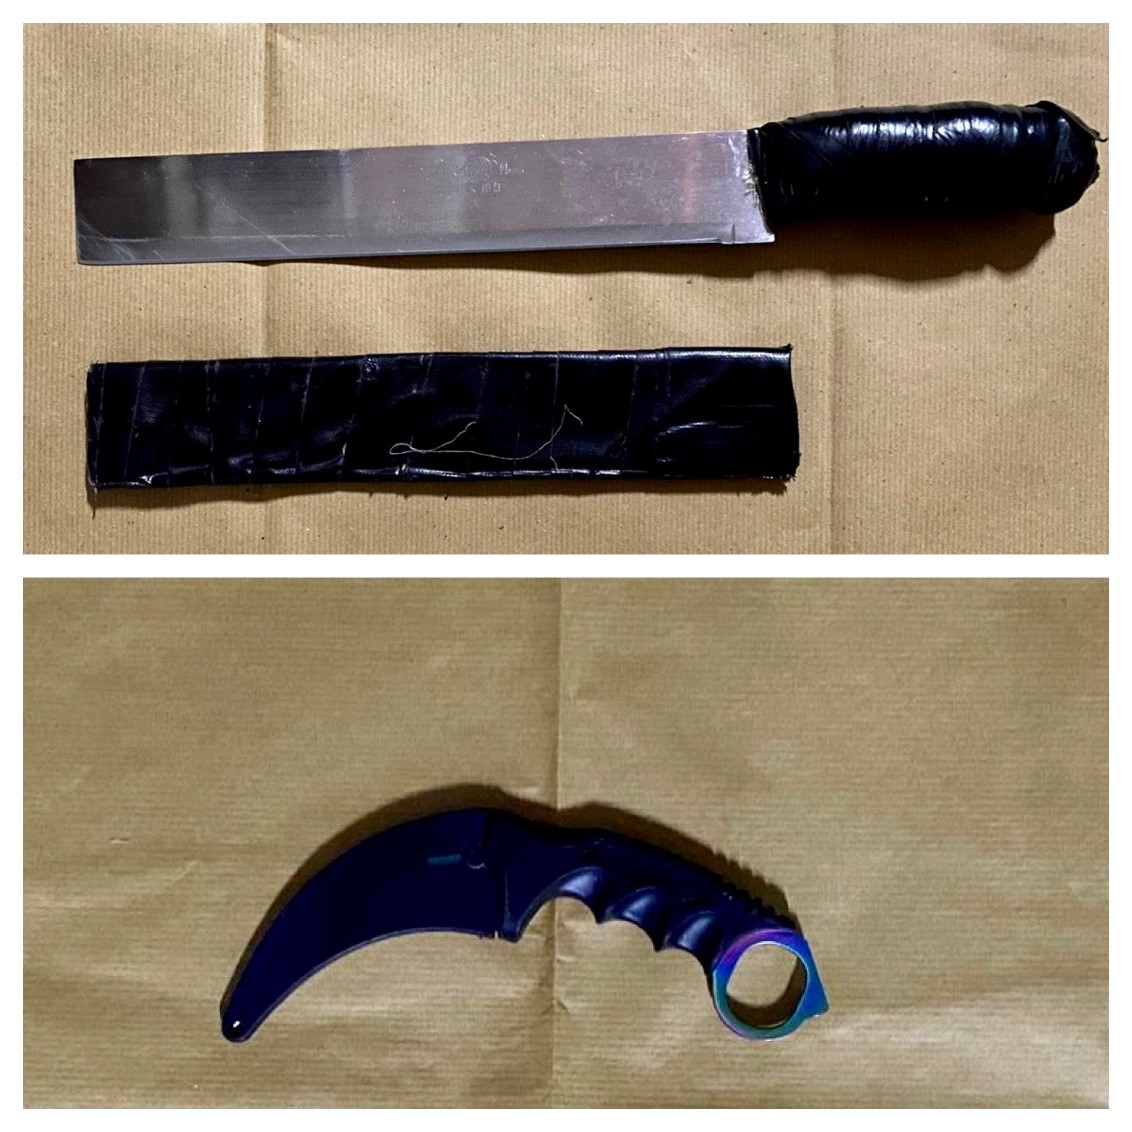 Photos 1 and 2 (CNB) – A parang knife with a 30-cm blade (top) and ‘Karambit’ knife (bottom) seized from a 24-year-old Singaporean male in the vicinity of Woodlands Street 32 on 7 September 2020. 